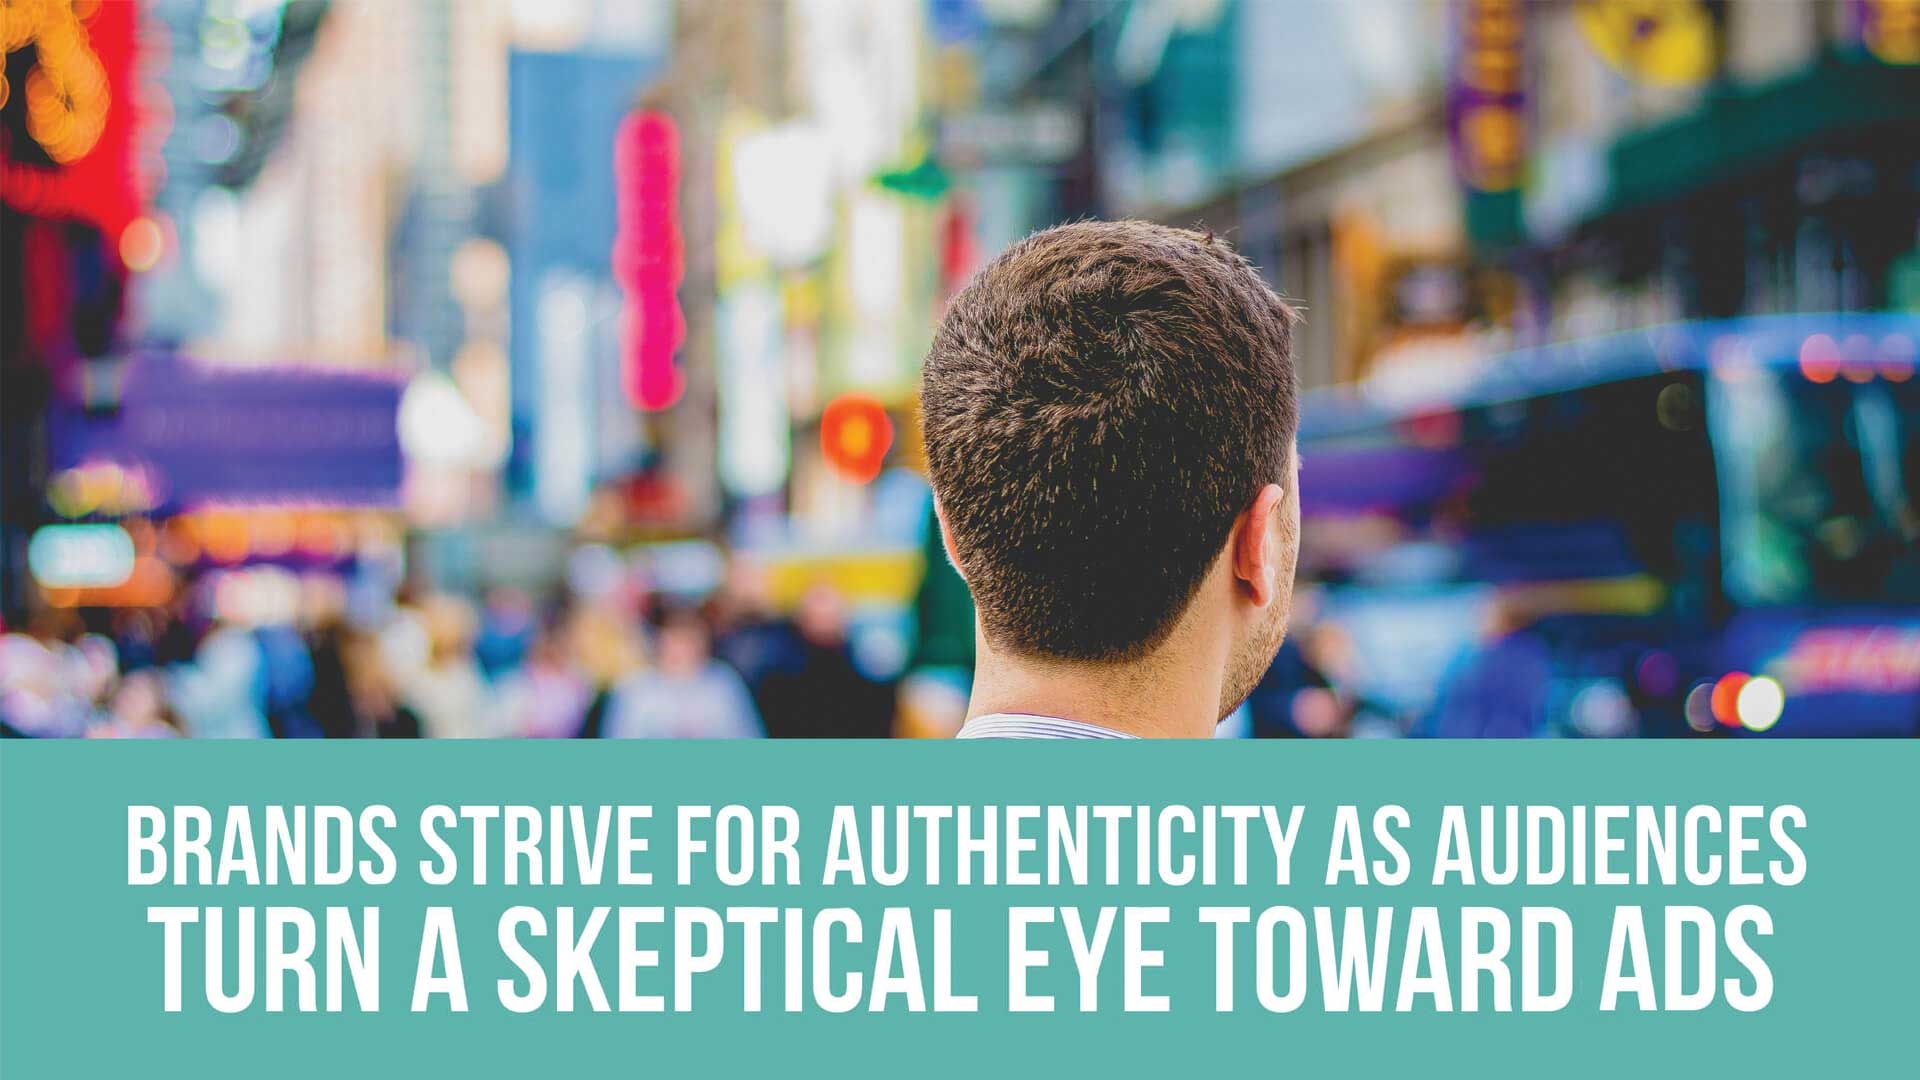 Brands strive for authenticity as audiences turn a skeptical eye toward ads